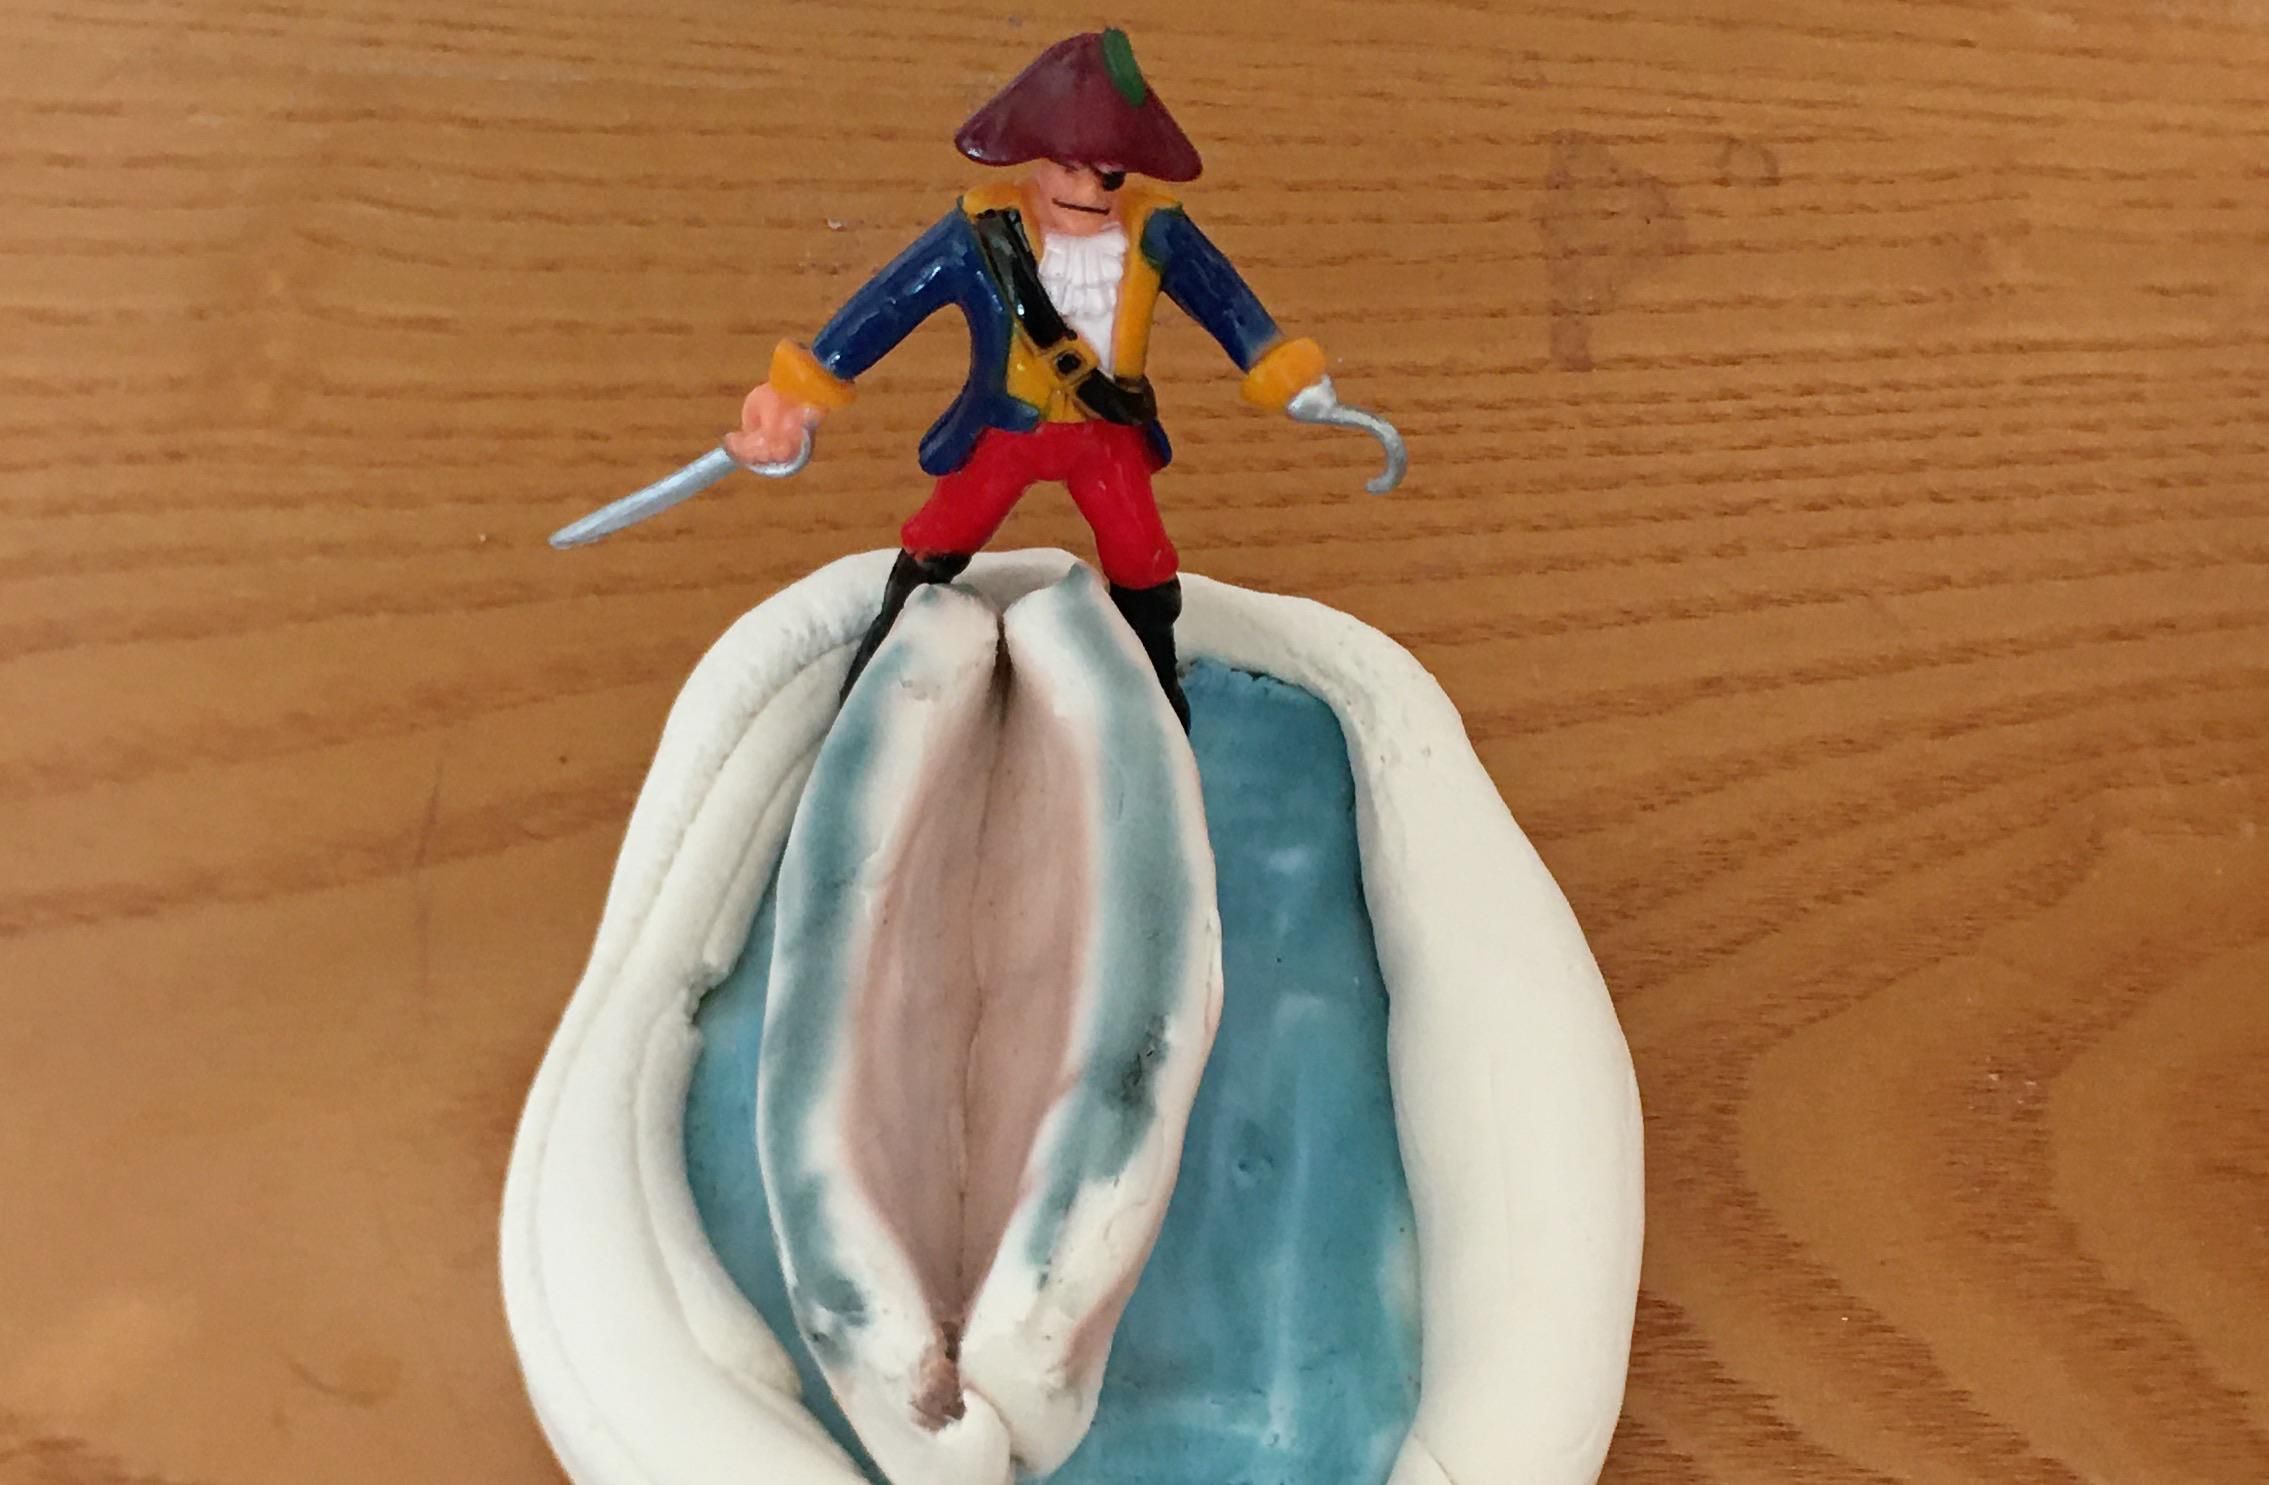 My 7yo son was excited to show off his clay pirate boat